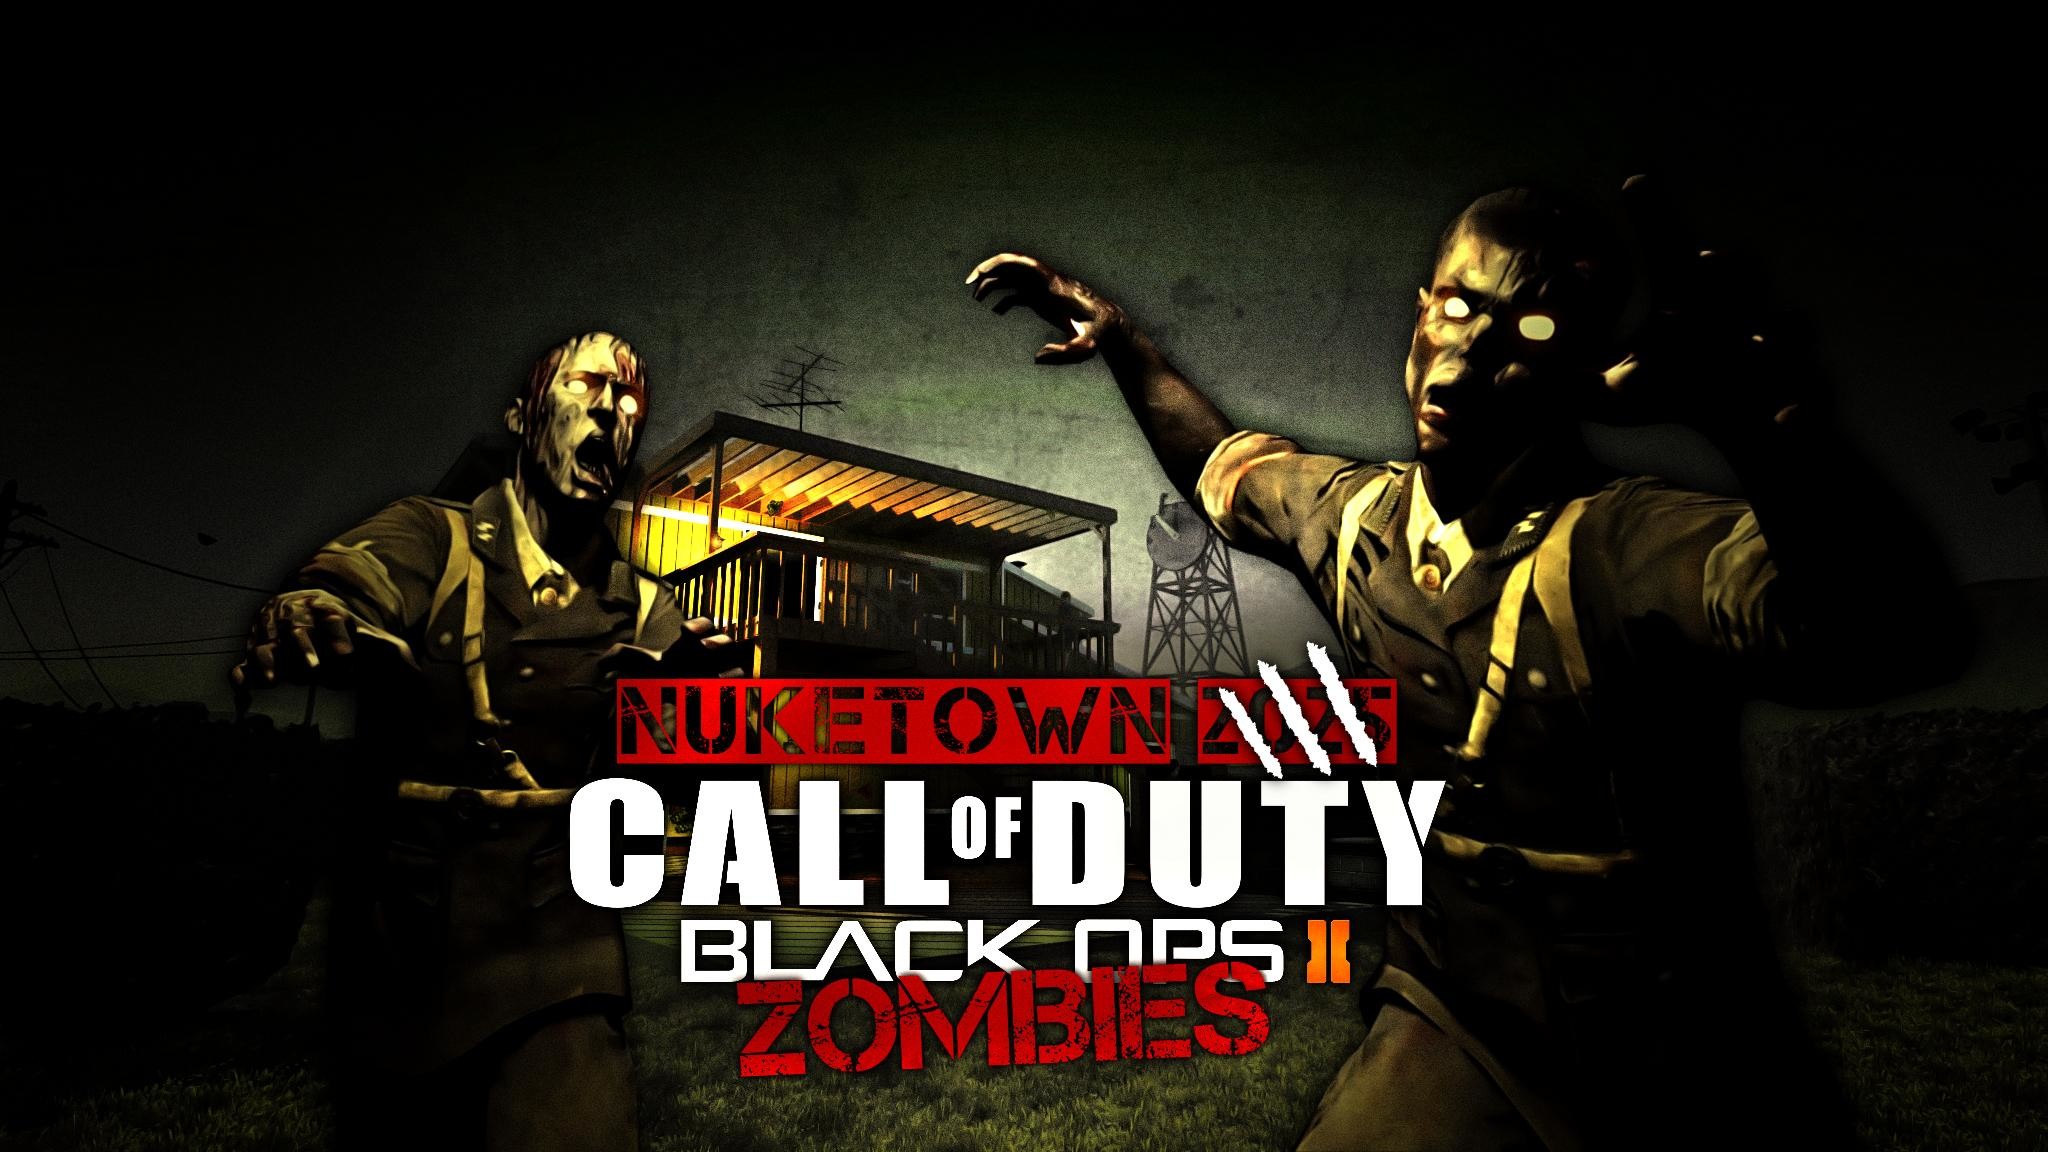 2048x1152 Call of Duty Black Ops 2 Zombies Nuketown Wallpaper